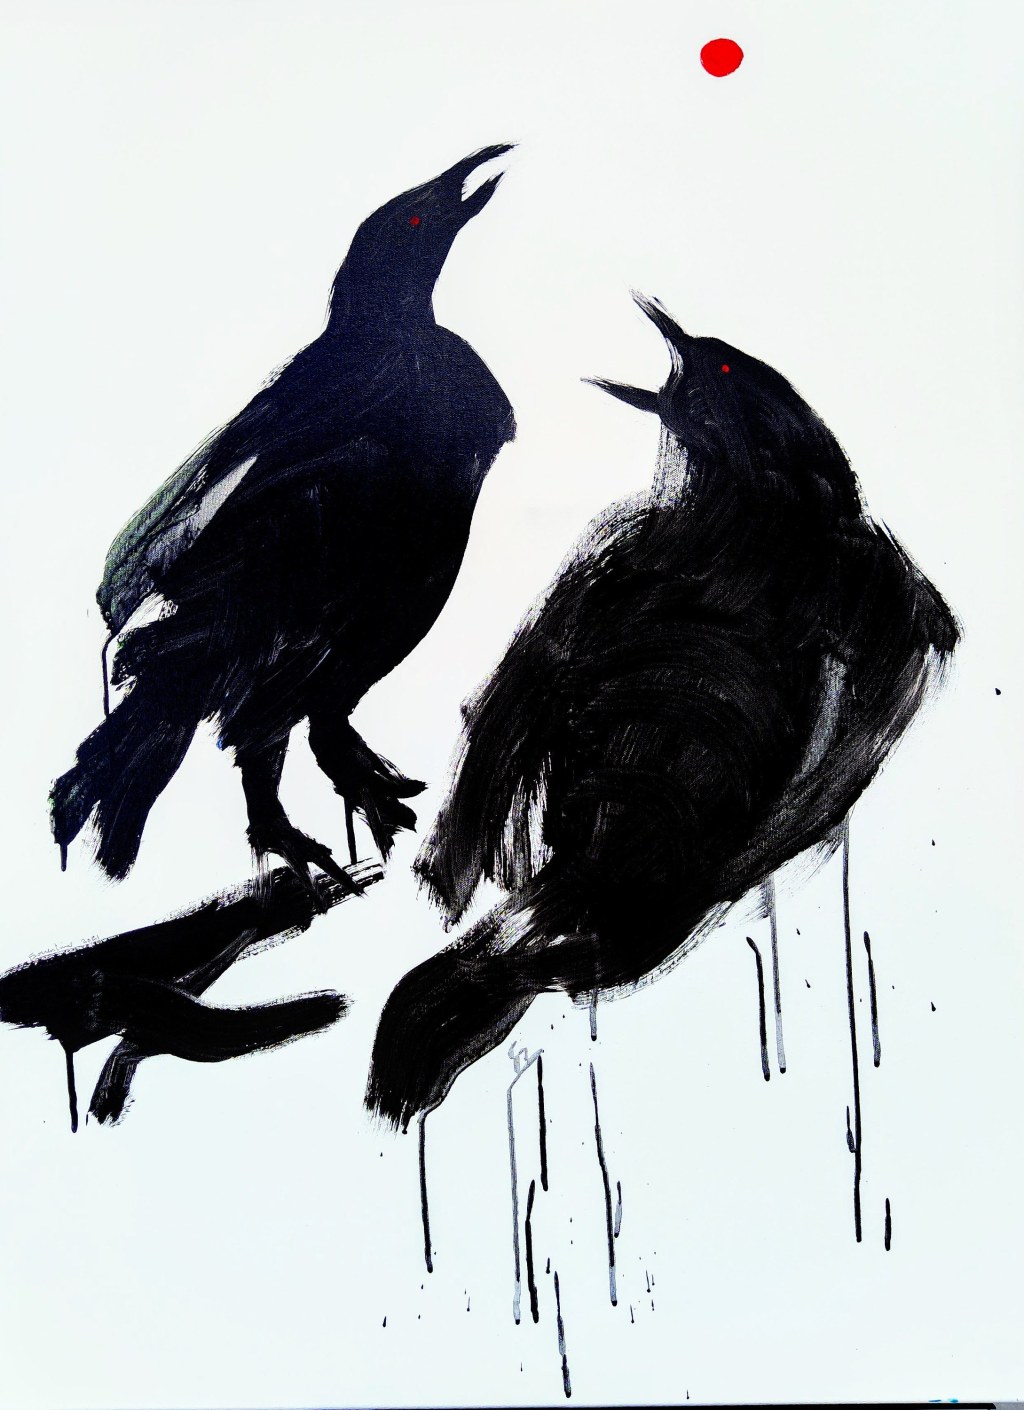 Picture of: Still life CROW PAINTING Abstract Giclee on Canvas Large acrylic CROW birds  “Relationship is complicated” By Susan Sorrentino Free Shipping